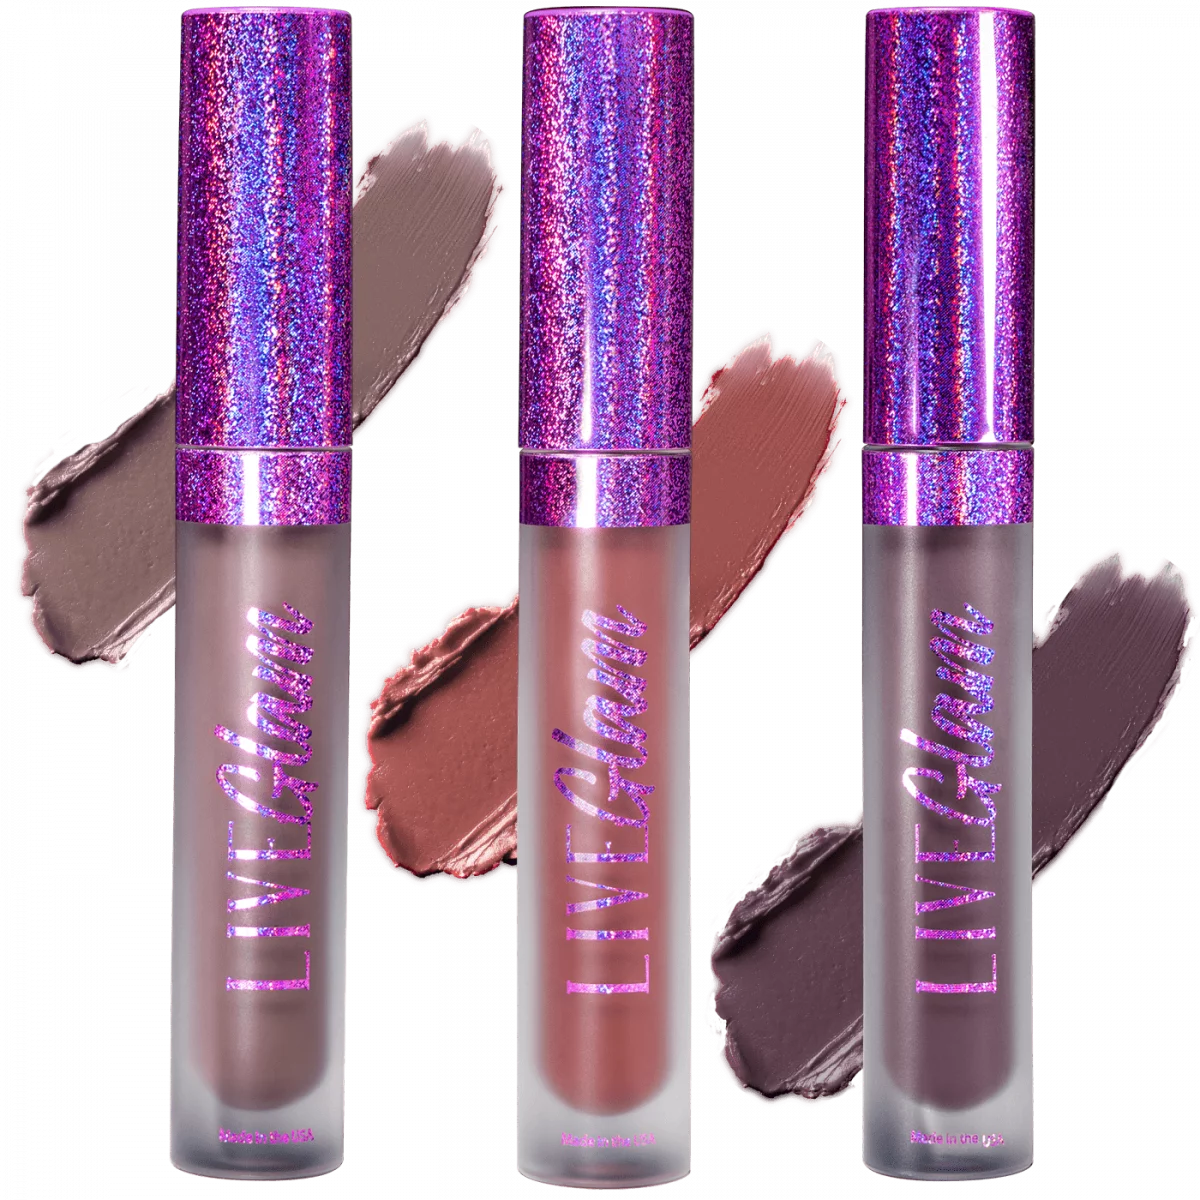 LiveGlam October 2020 Lippie Club Enchanted Kisses Collection